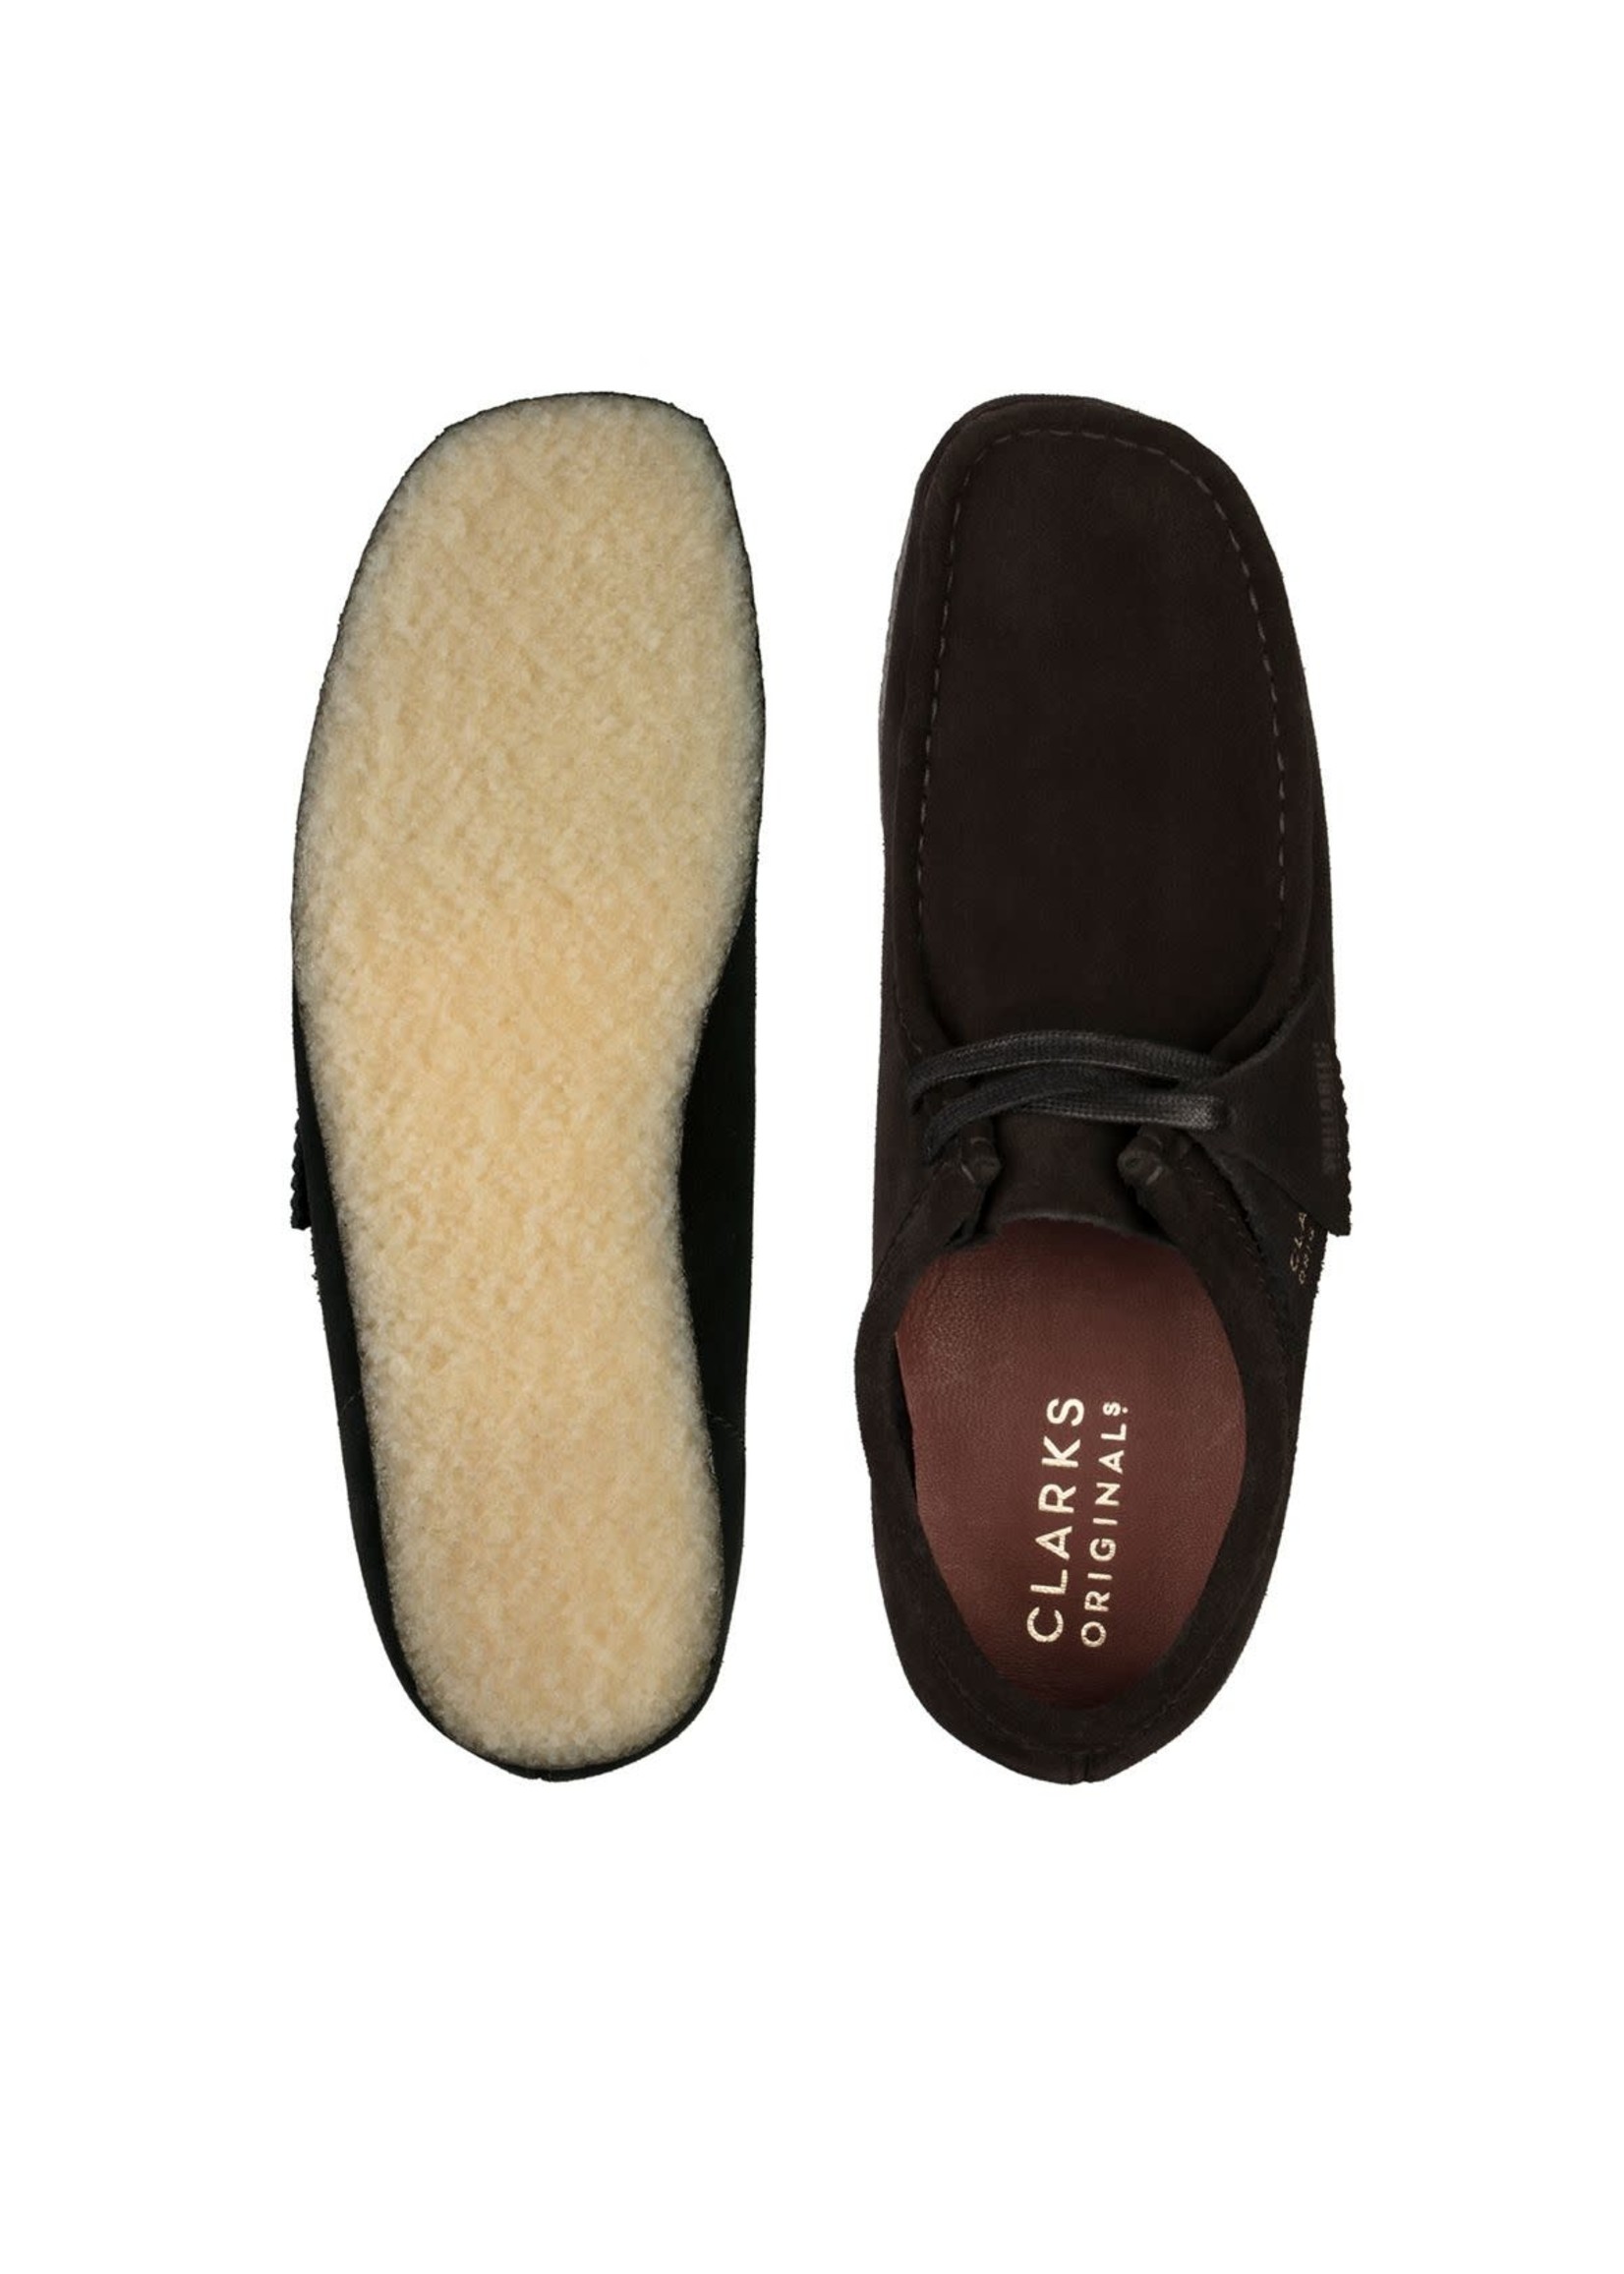 Clarks Wallabee Black Sde - SHOE PLUS - Low Prices - Express 